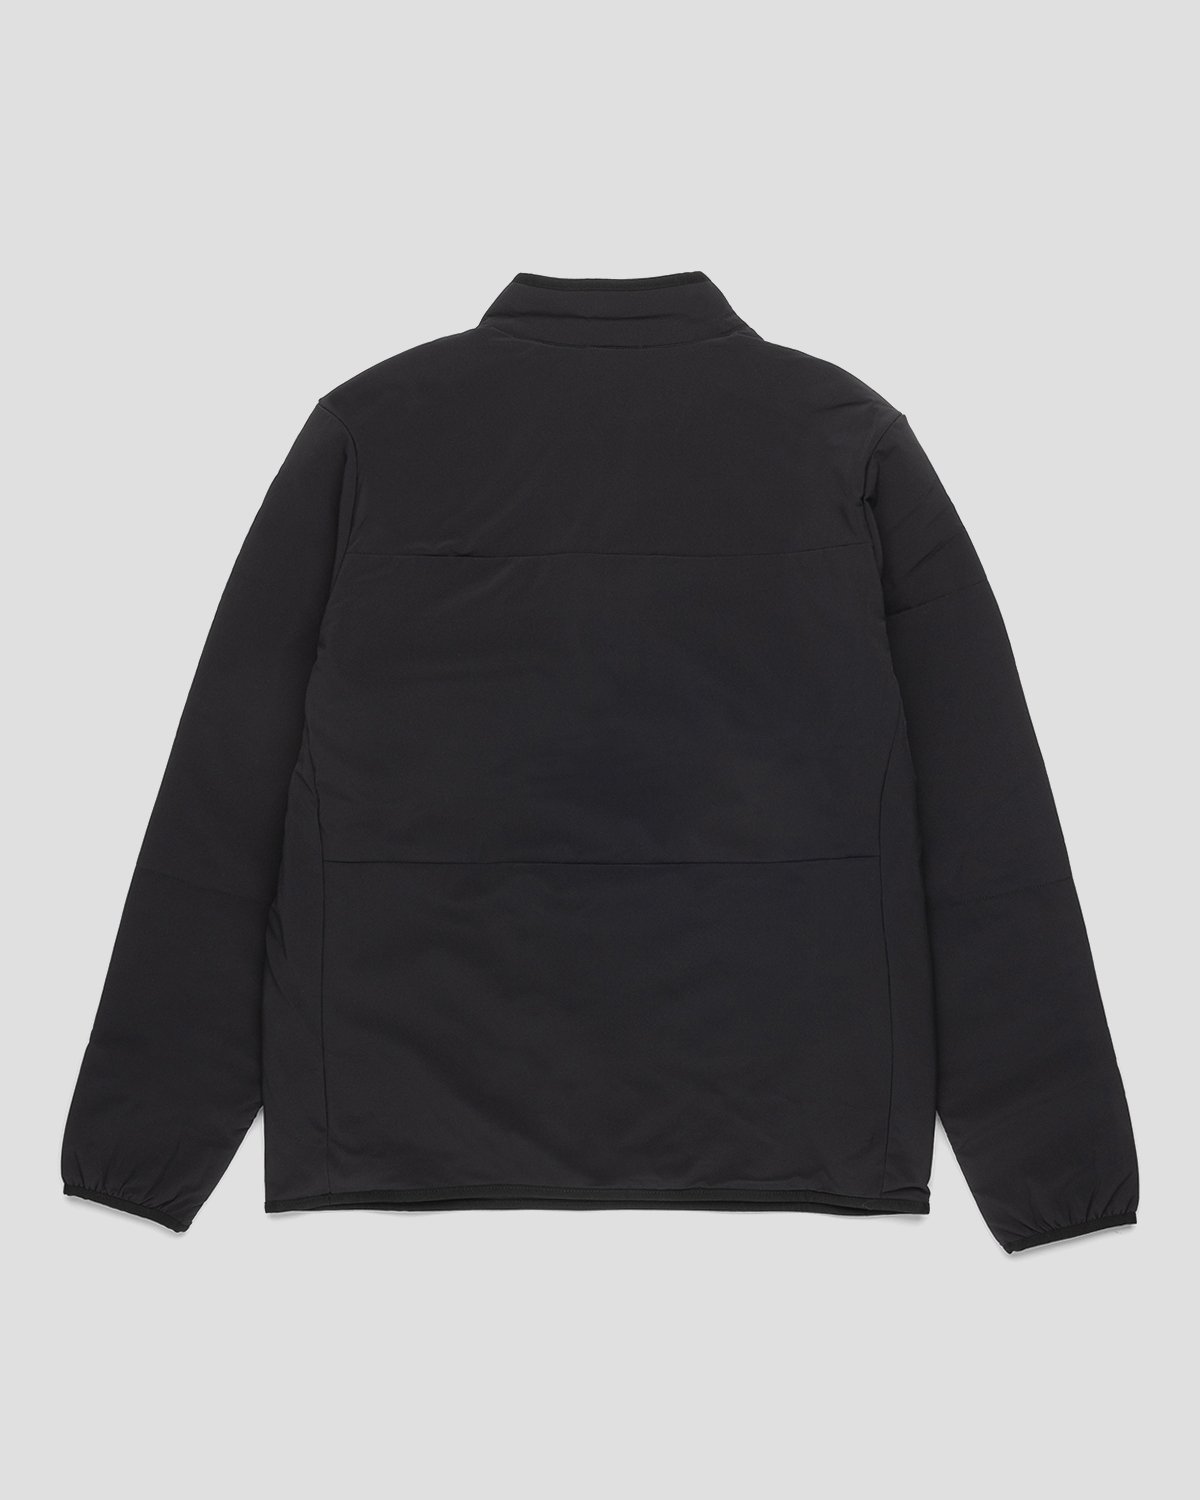 The North Face - Mountain Sweatshirt Pullover Black - Clothing - Black - Image 2